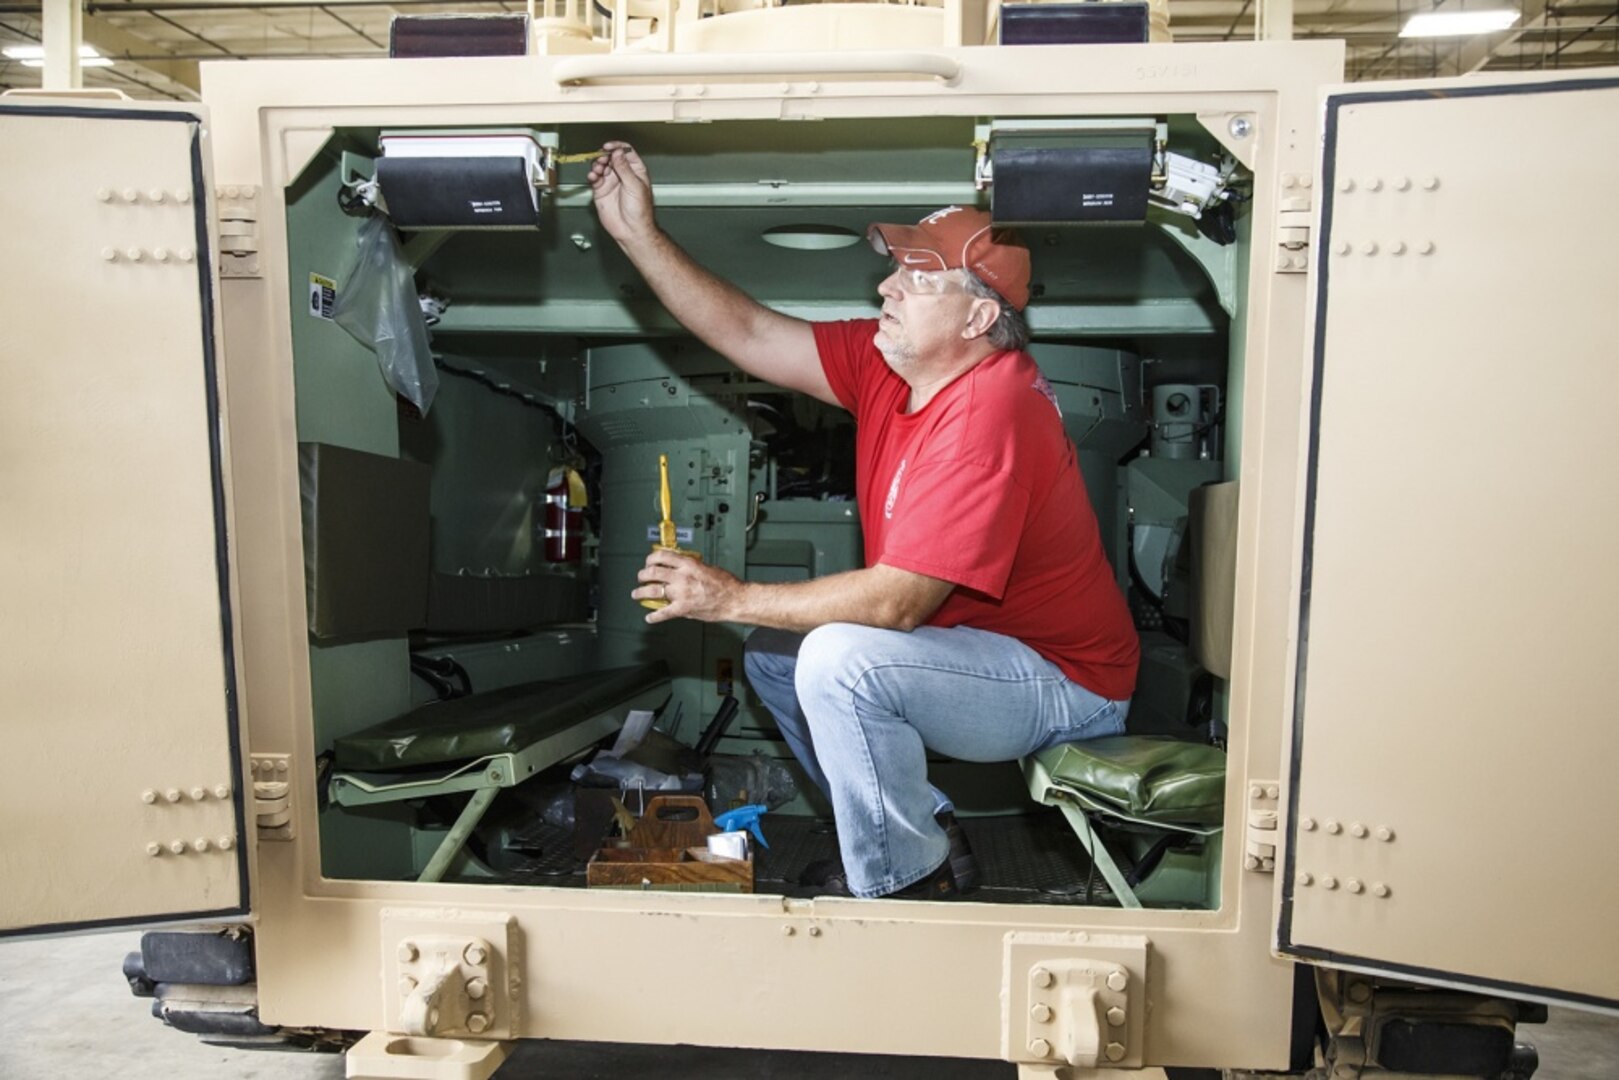 Ronald Wilkinson with DLA Distribution Anniston, Ala., applies glue to components in a M113A3/BMP-2 Opposing Forces Surrogate Vehicle prior to shipping from Anniston Army Depot. The installation recently completed overhaul of 14 of these training vehicles, which are designed to look like Russian combat vehicles.